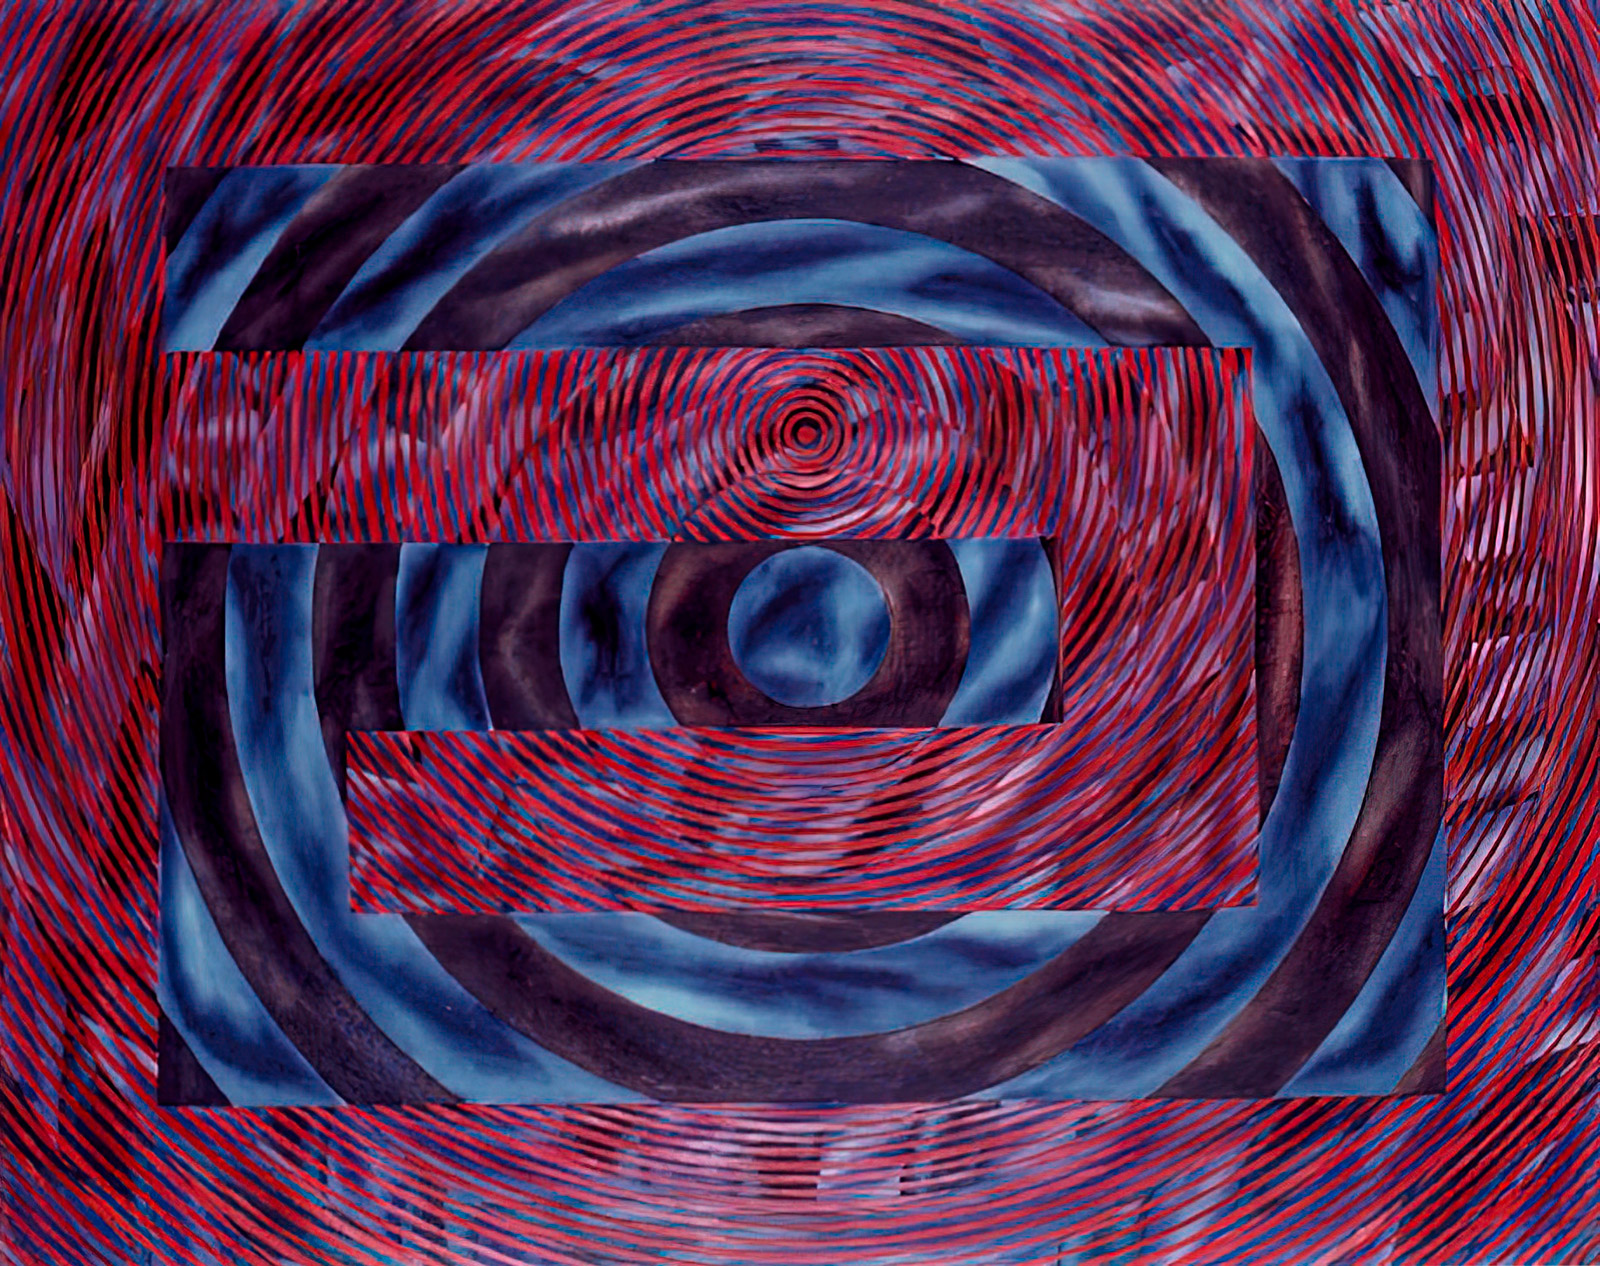 Crosscurrent-Alternation-oil-and-acrylic-on-canvas-121x-152-cm-1994-gigapixel-art-scale-4_00x